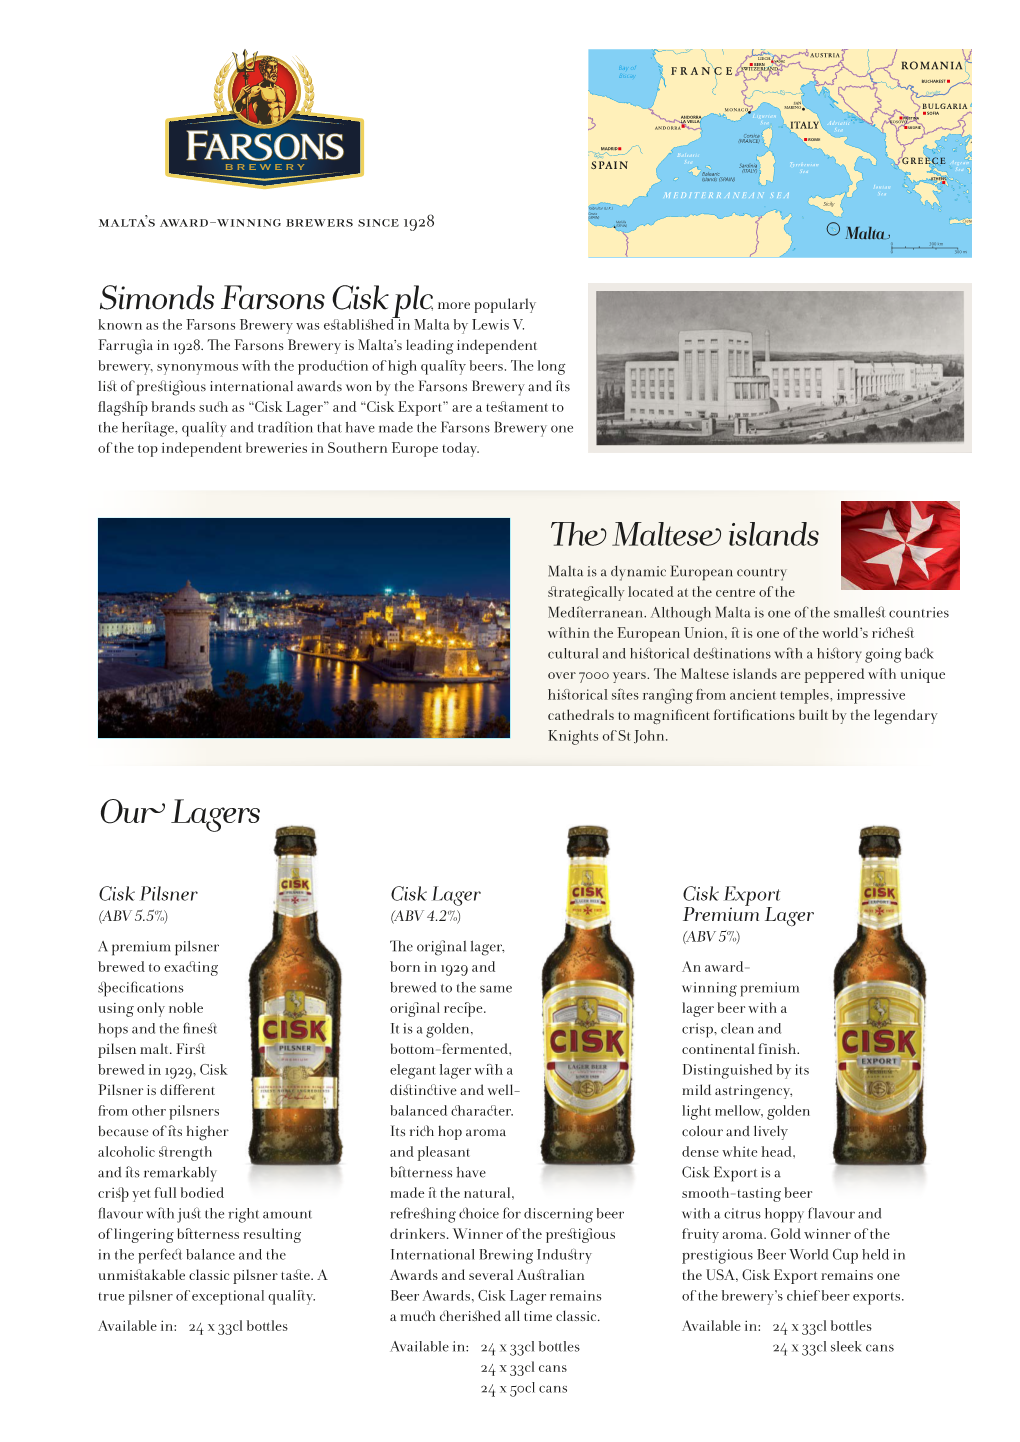 Simonds Farsons Cisk Plc, More Popularly Our Lagers the Maltese